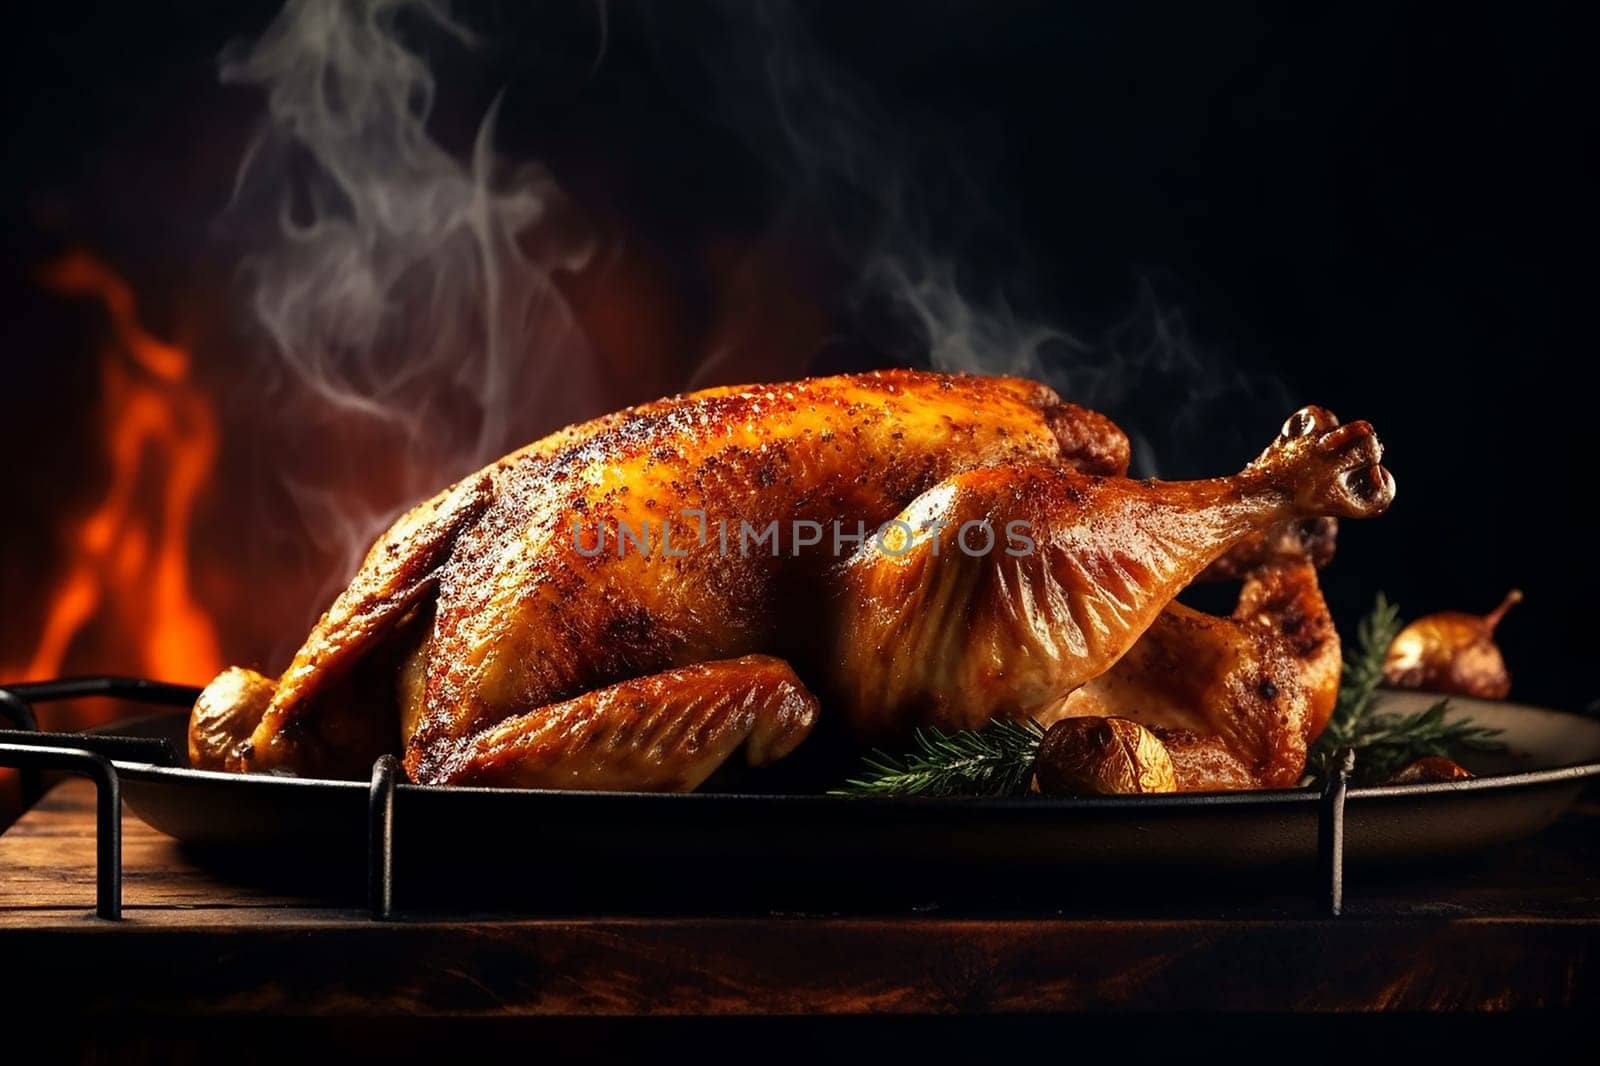 Golden roasted turkey on a tray garnished with herbs. by Hype2art